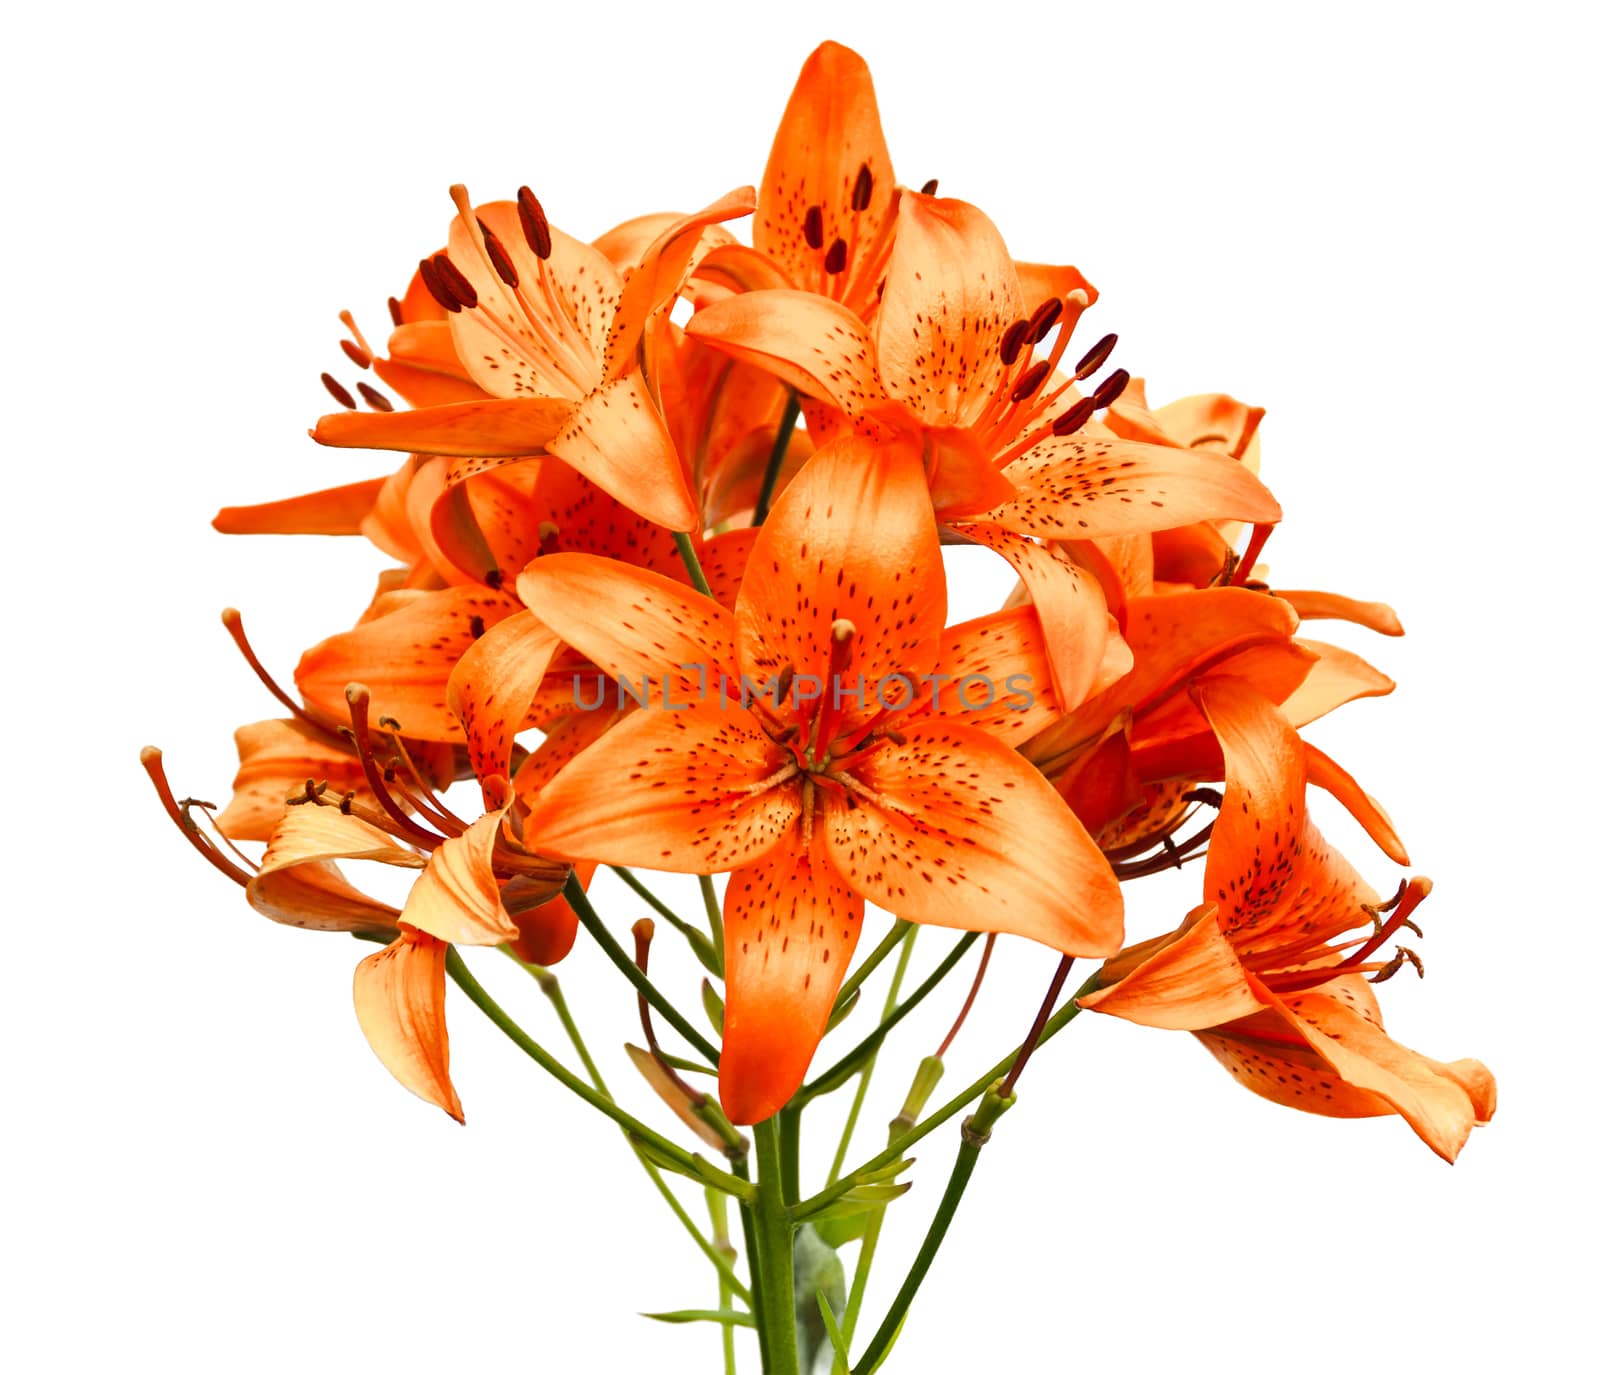 Orange lily flowers isolated on white by zeffss